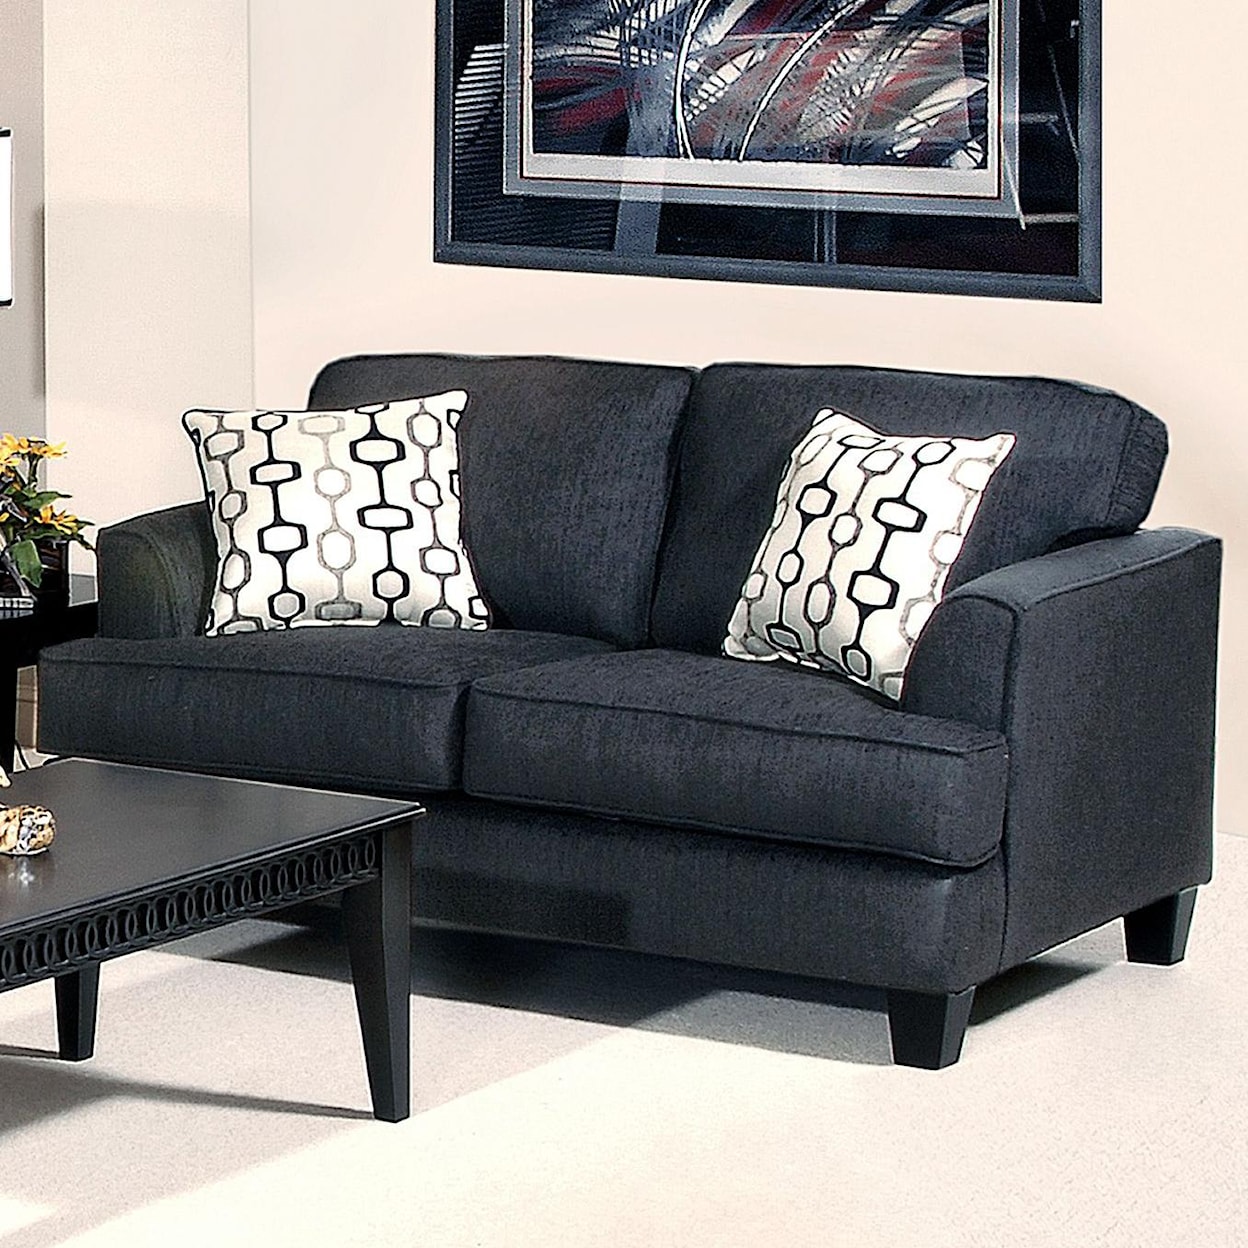 Serta Upholstery by Hughes Furniture 5600 Transitional Love Seat